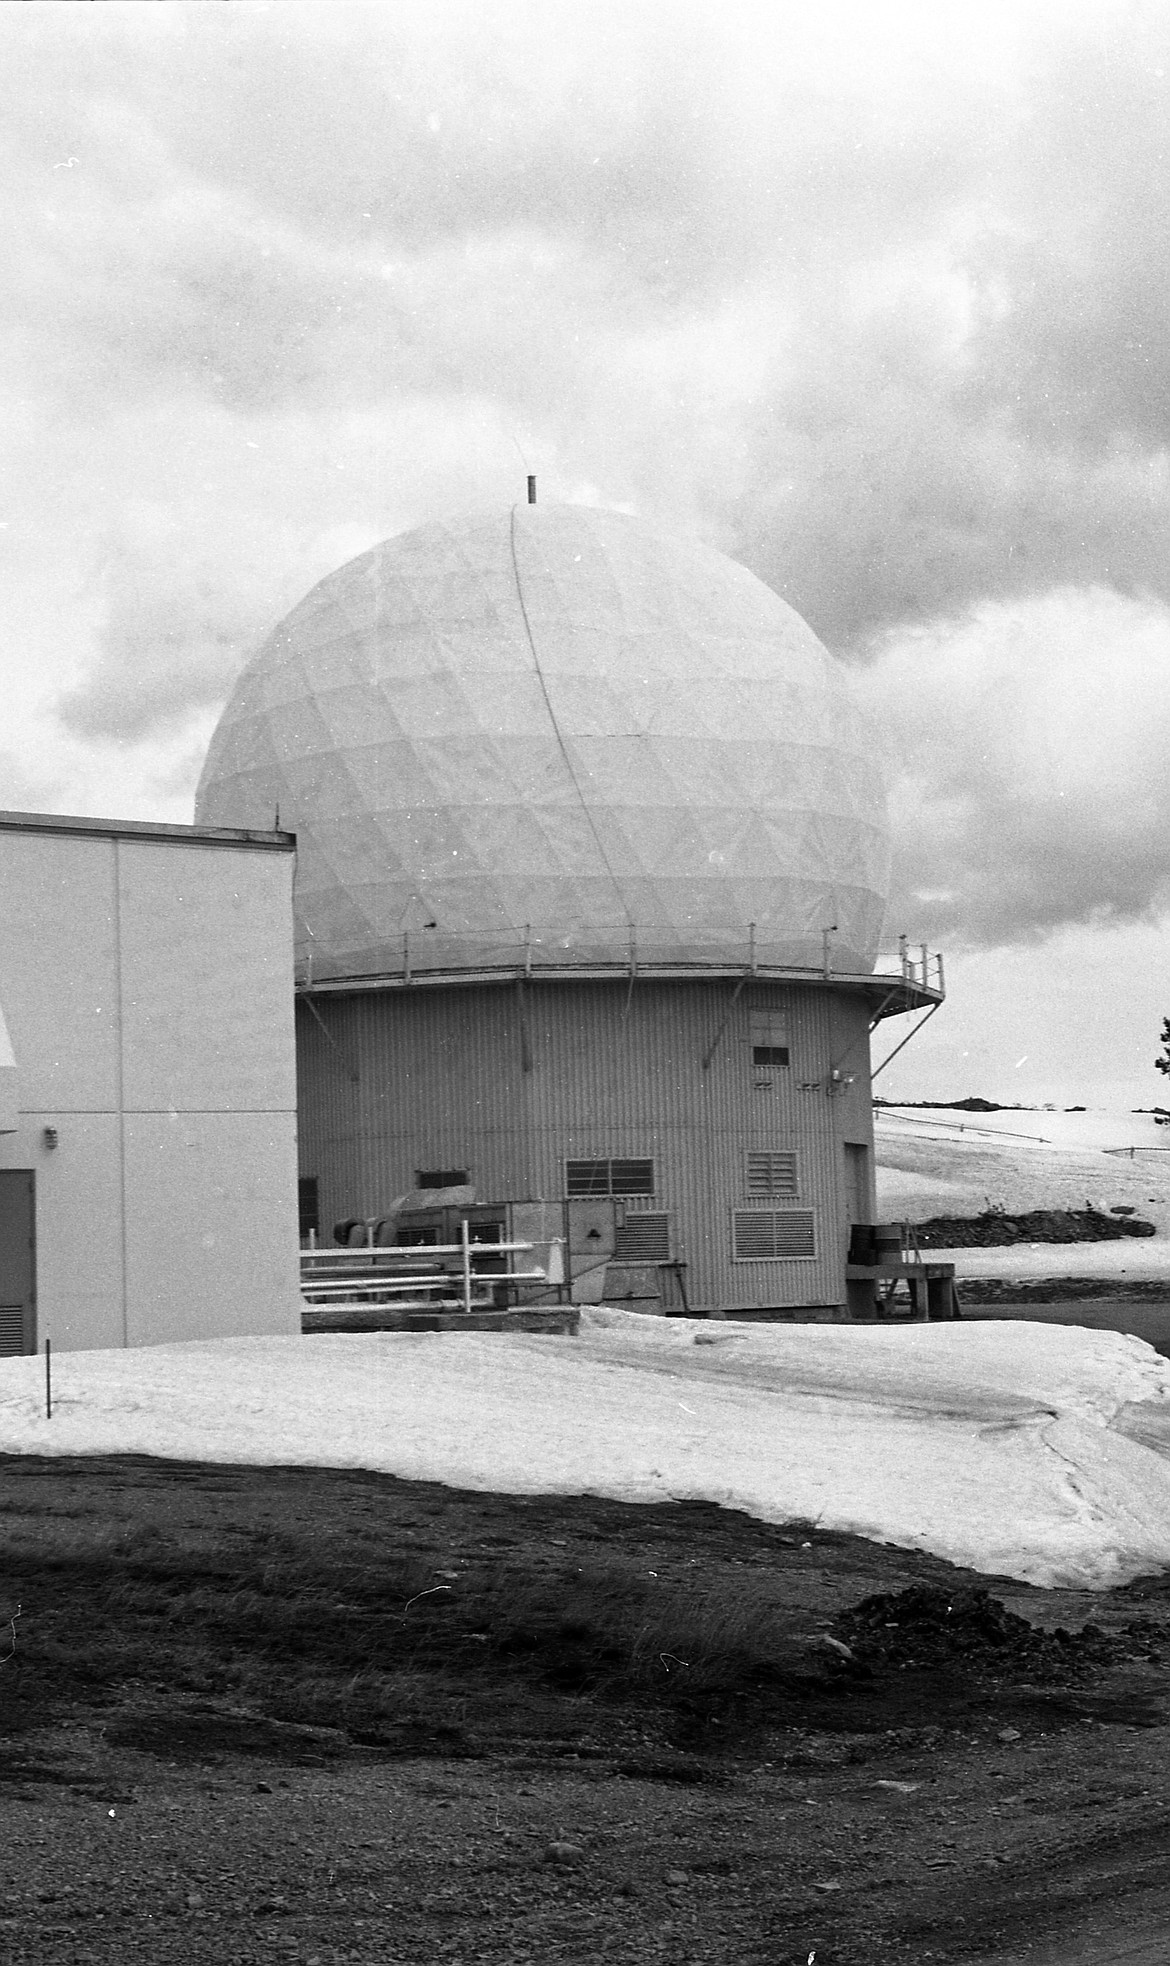 Radar domes the U.S. Air Force base in Lakeside in 1967. (Daily Inter Lake file)